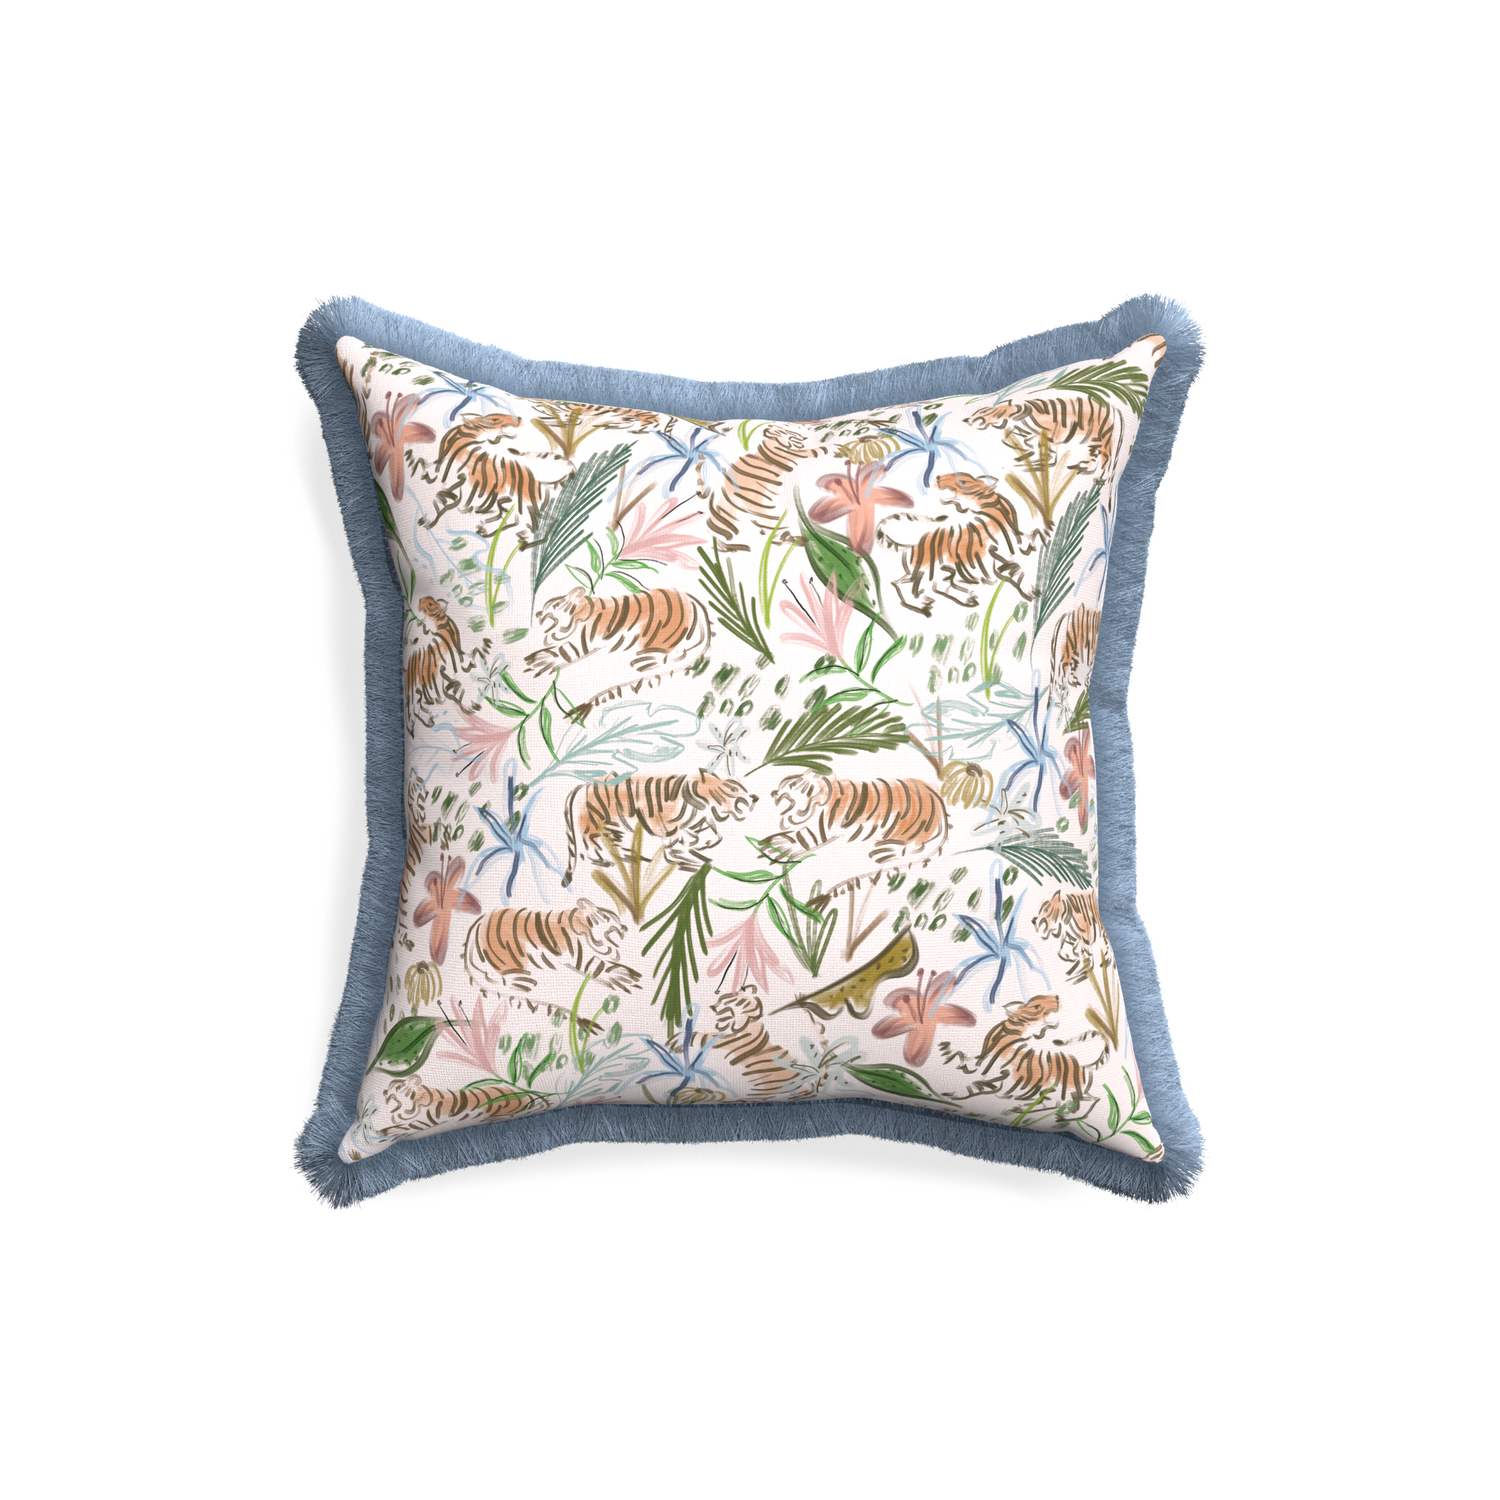 18-square frida pink custom pink chinoiserie tigerpillow with sky fringe on white background